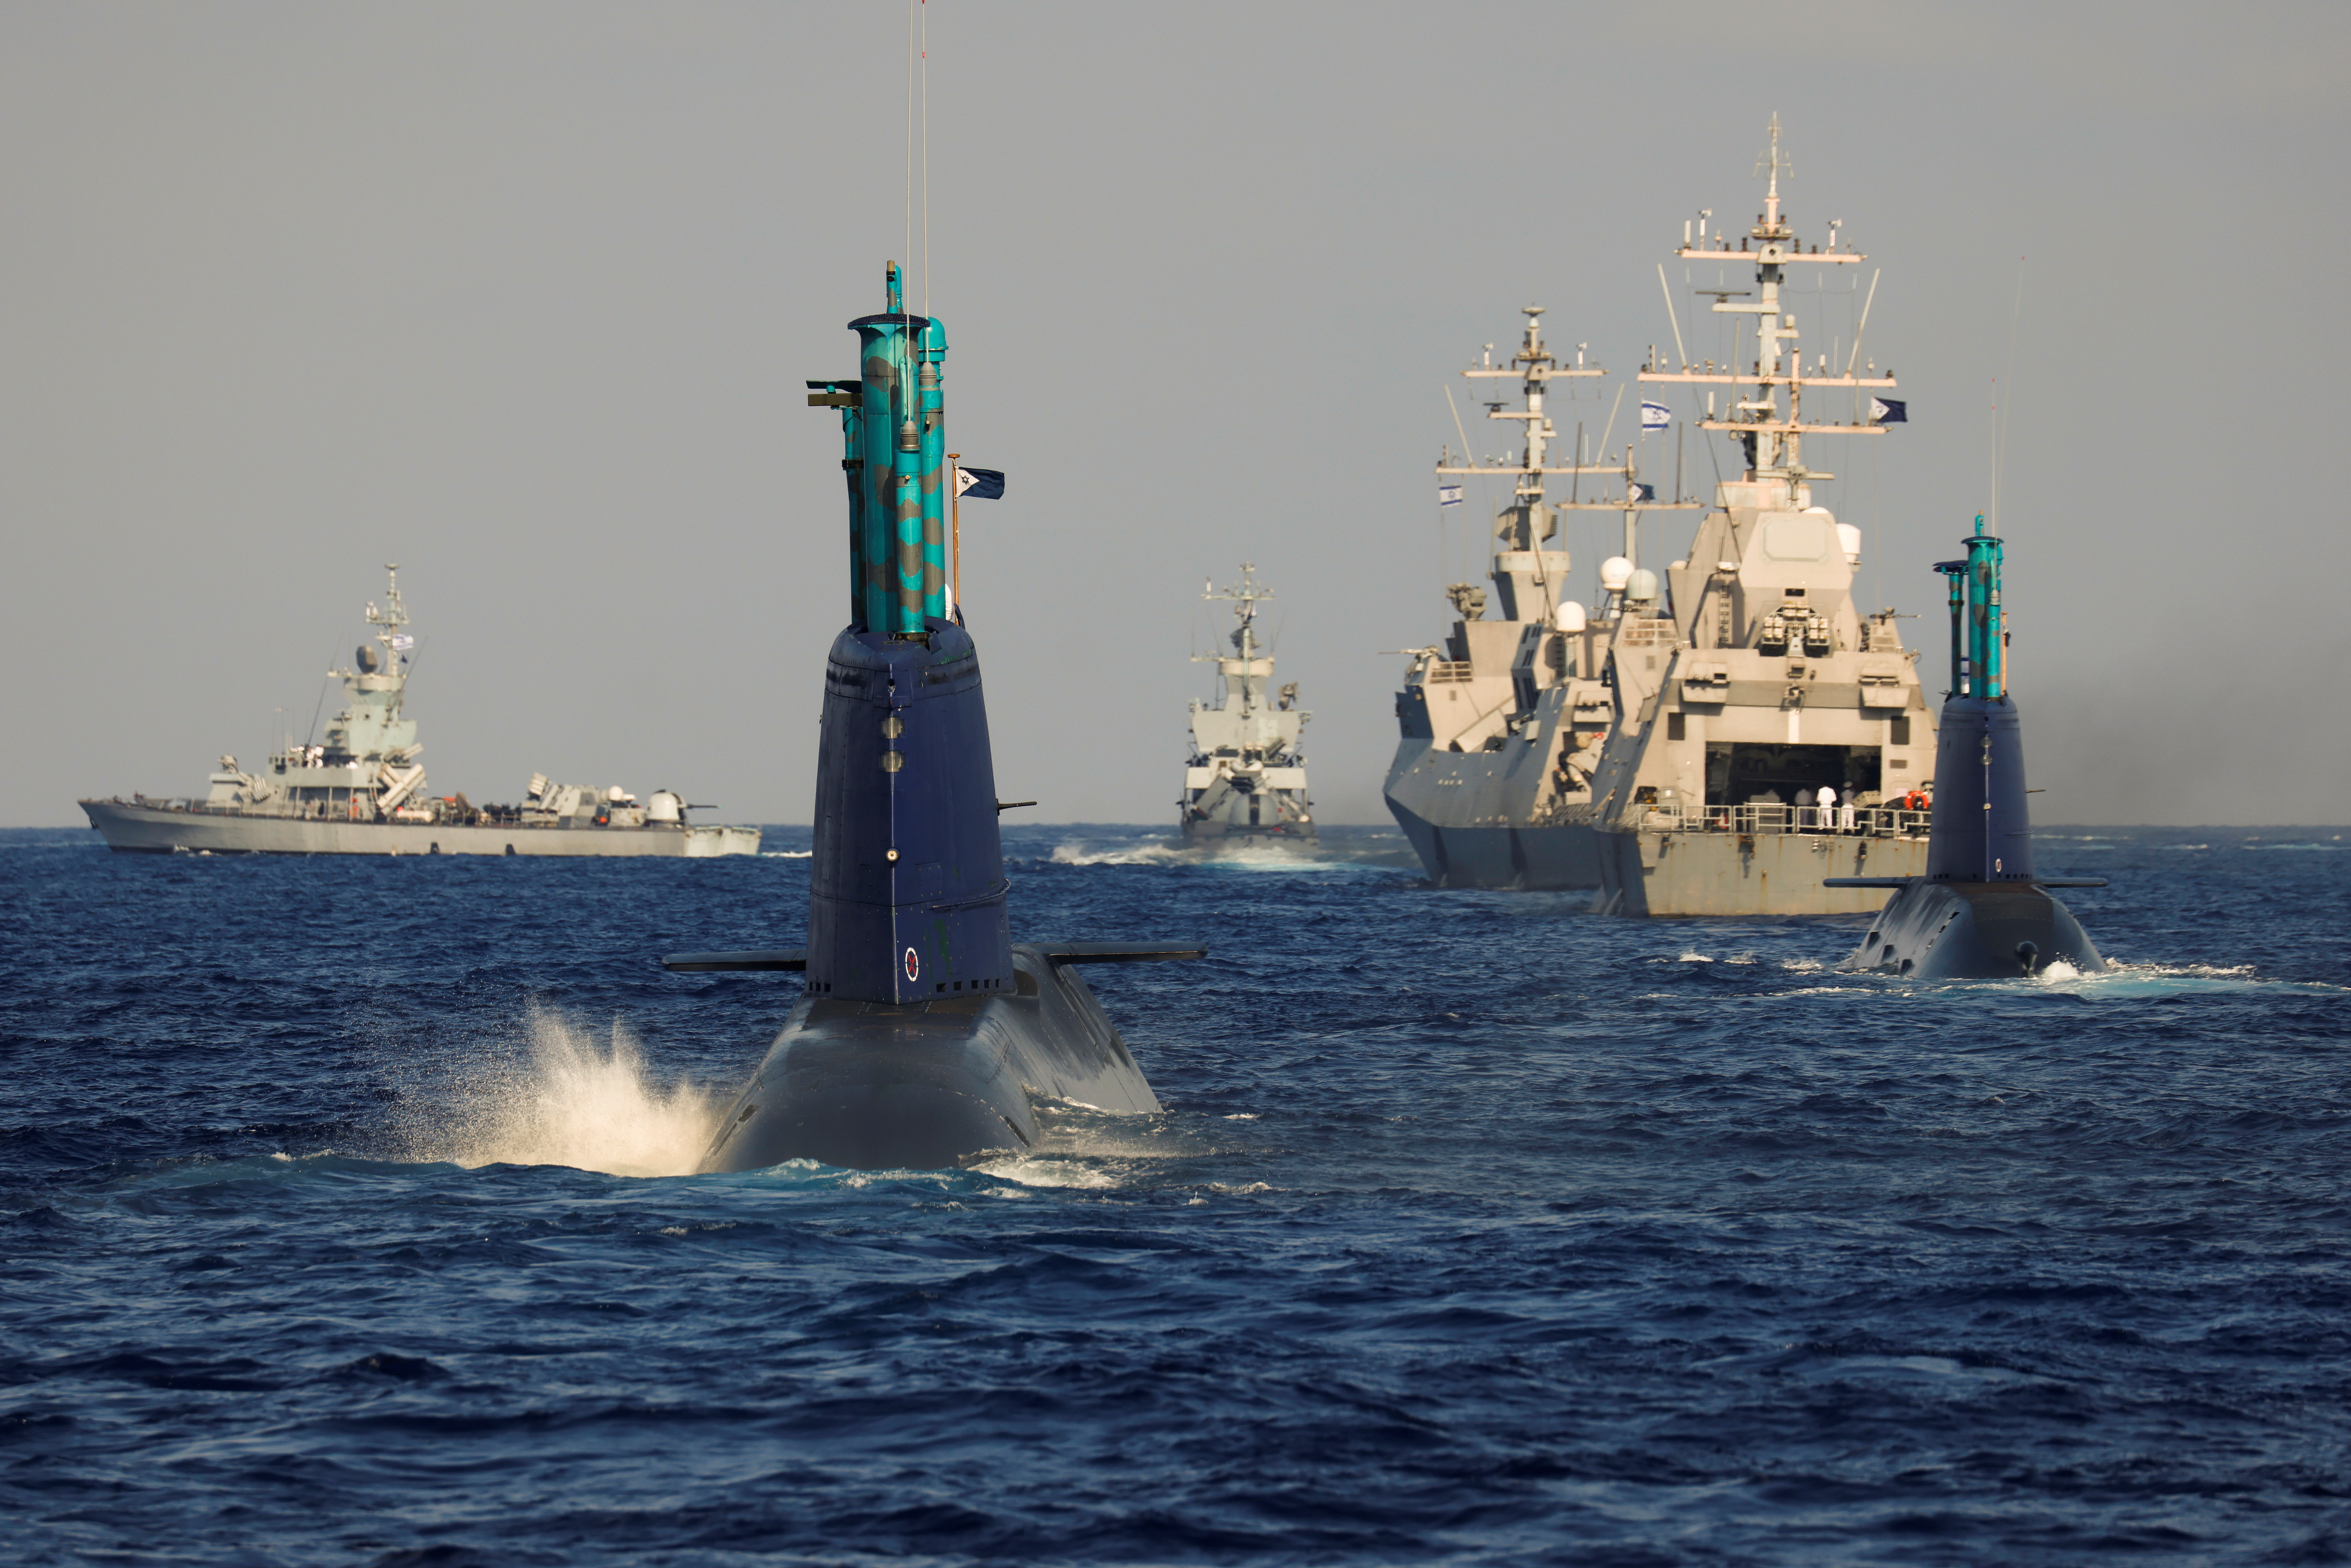 Leviathan and a second Israeli navy submarine are seen during a naval manoeuvre in the Mediterranean Sea off the coast of Haifa